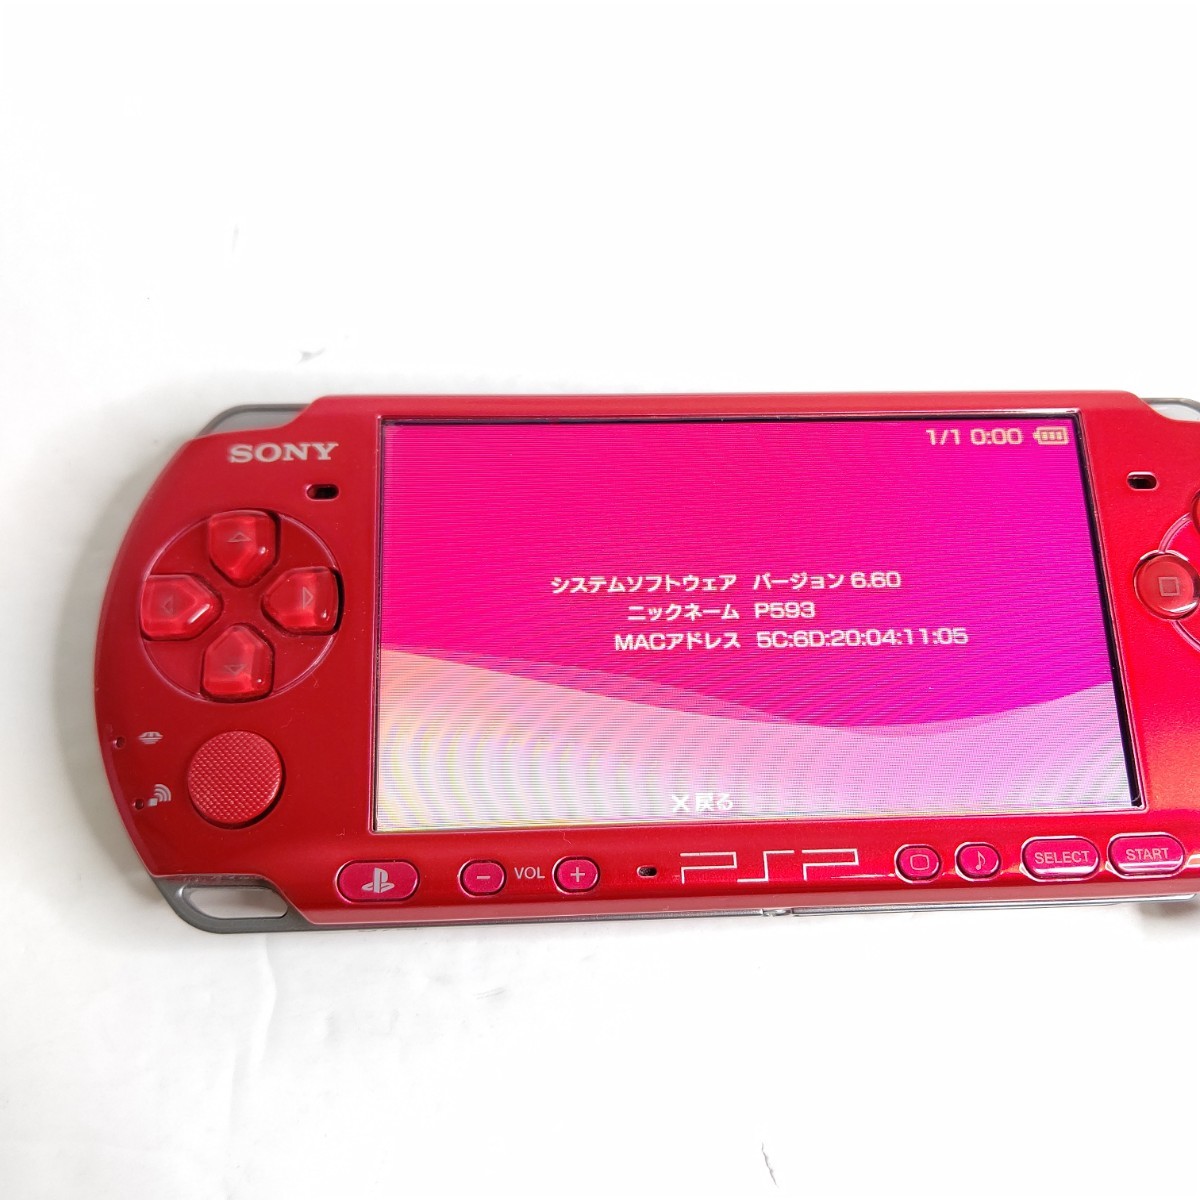 SONY PSP3000 ラディアントレッド 極美品 ソニー ゲーム機